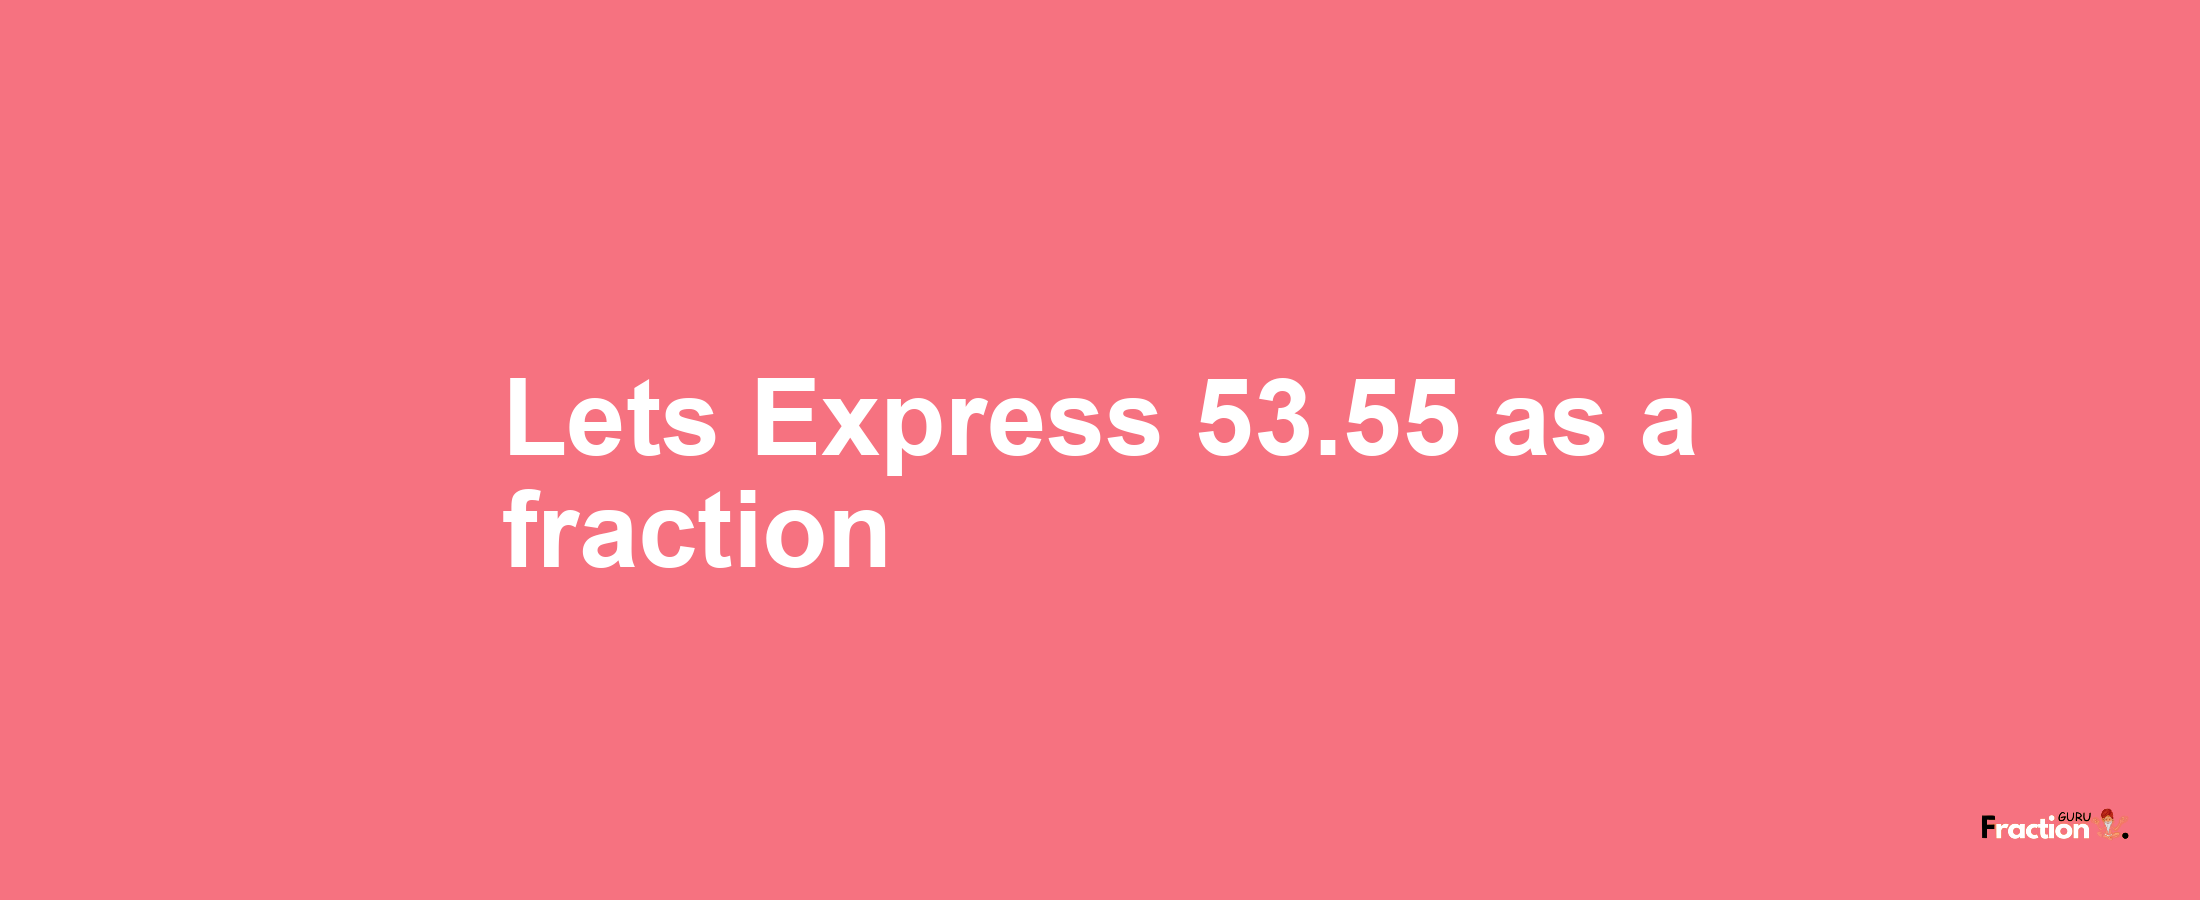 Lets Express 53.55 as afraction